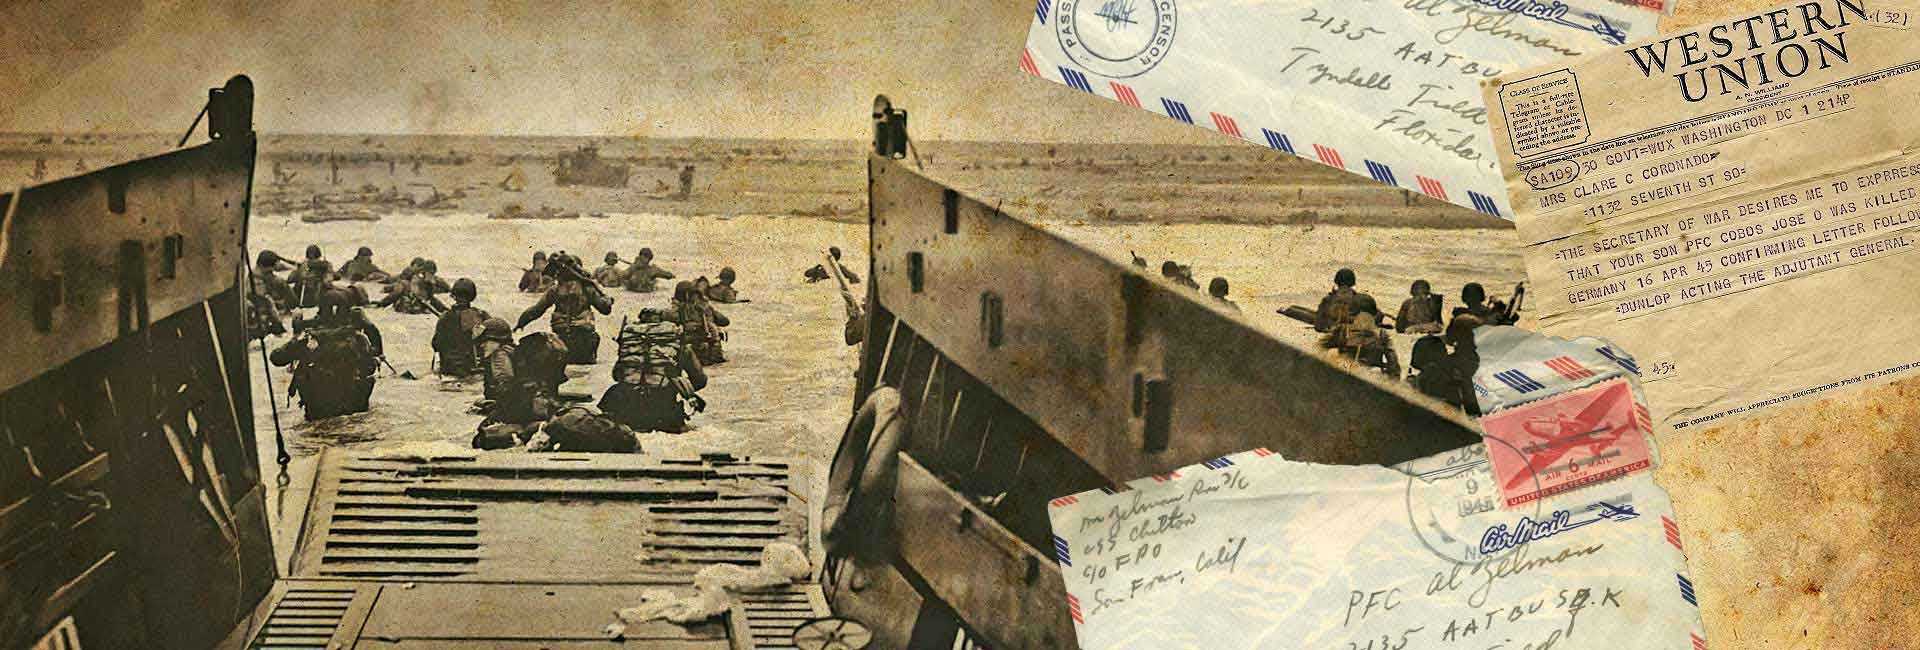 D-Day: World War II invasion was 79 years ago. It remains significant